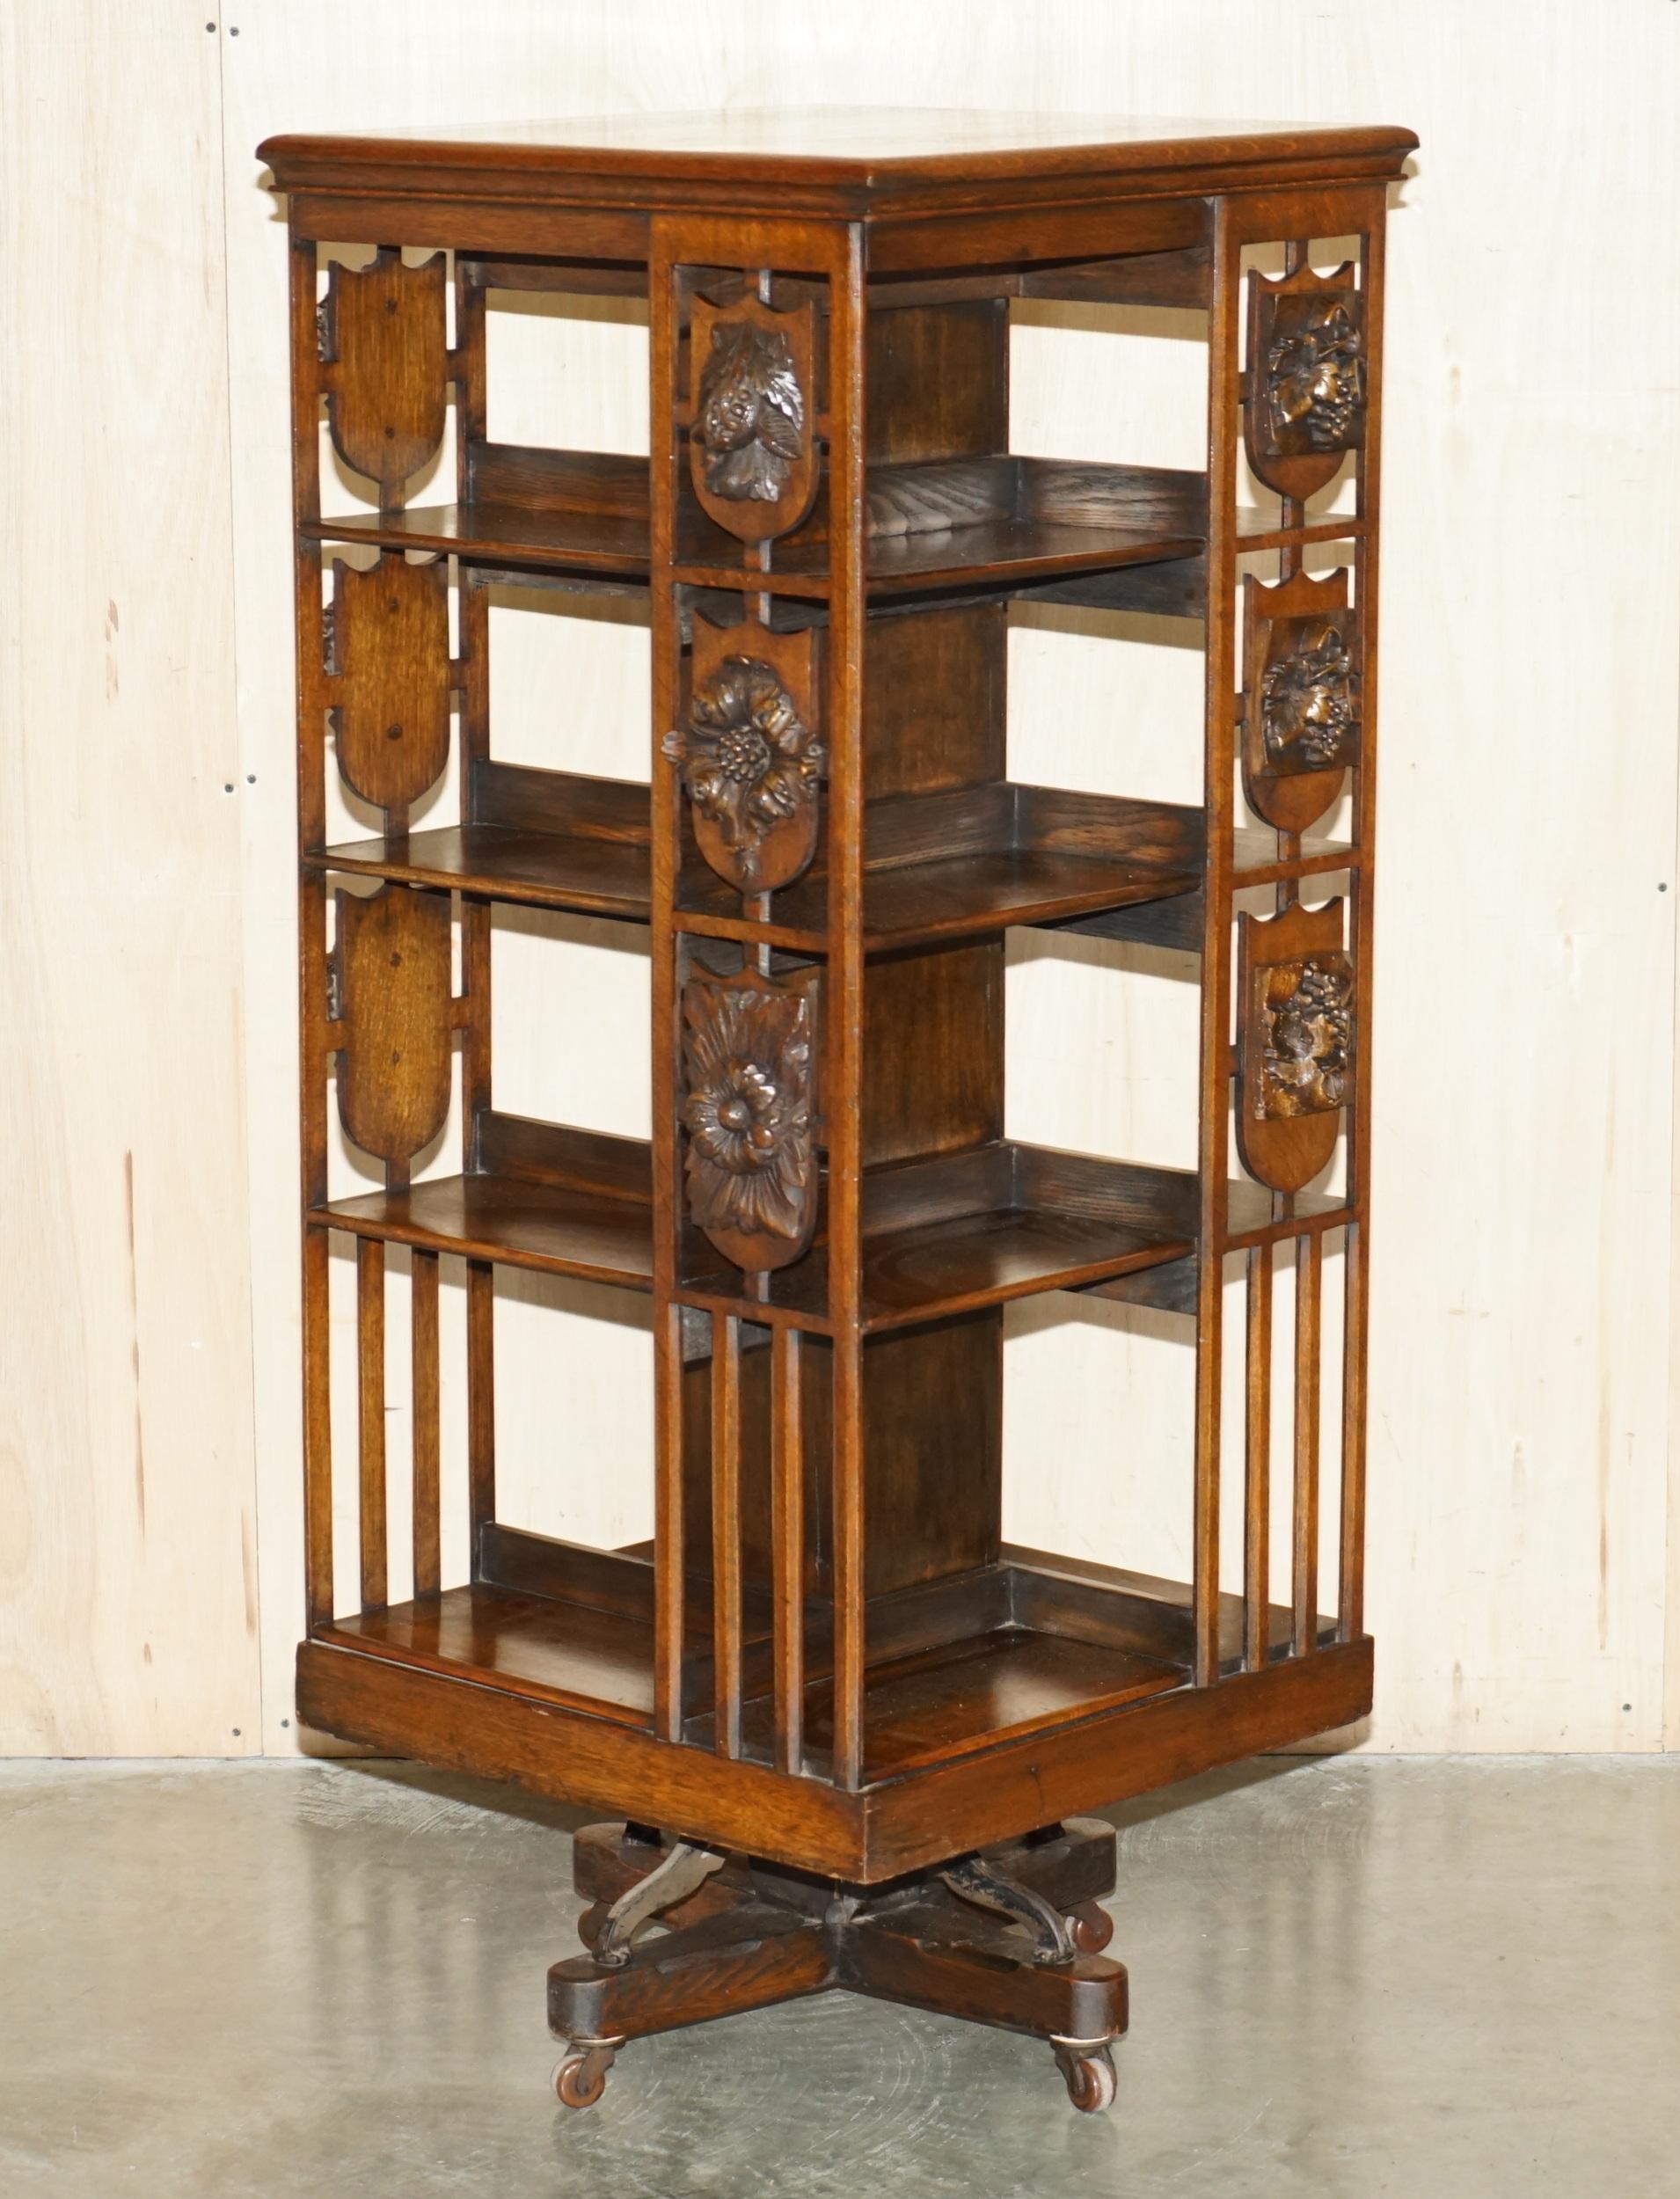 Royal House Antiques

Royal House Antiques is delighted to offer for sale this very fine antique very fine, fully restored, hand made in England in the Art Nouveau taste, oak revolving bookcase table that is extra tall at 143cm 

Please note the